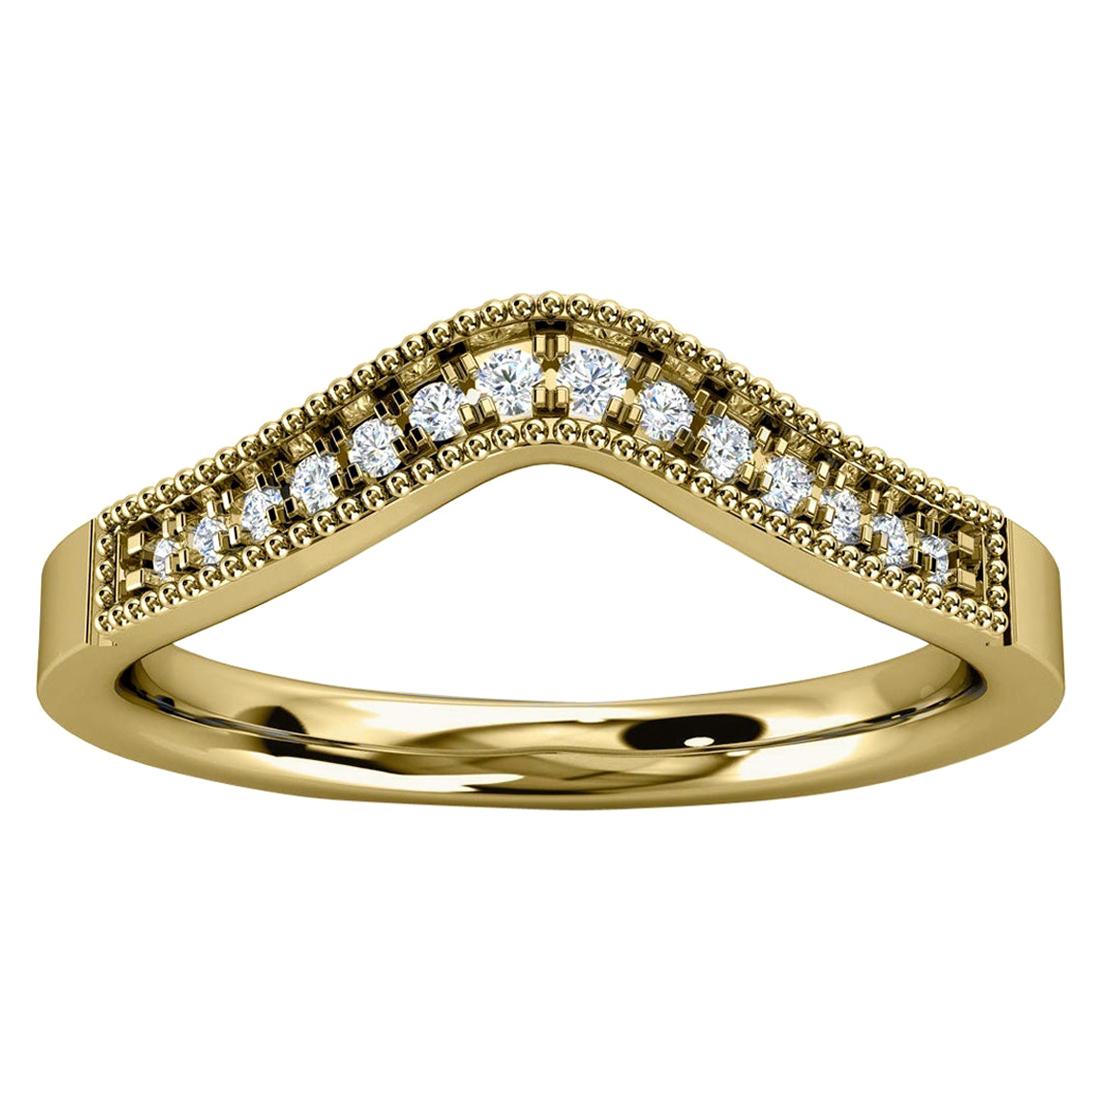 For Sale:  18K Yellow Gold Eleanor Curve Diamond Ring '1/10 Ct. Tw'